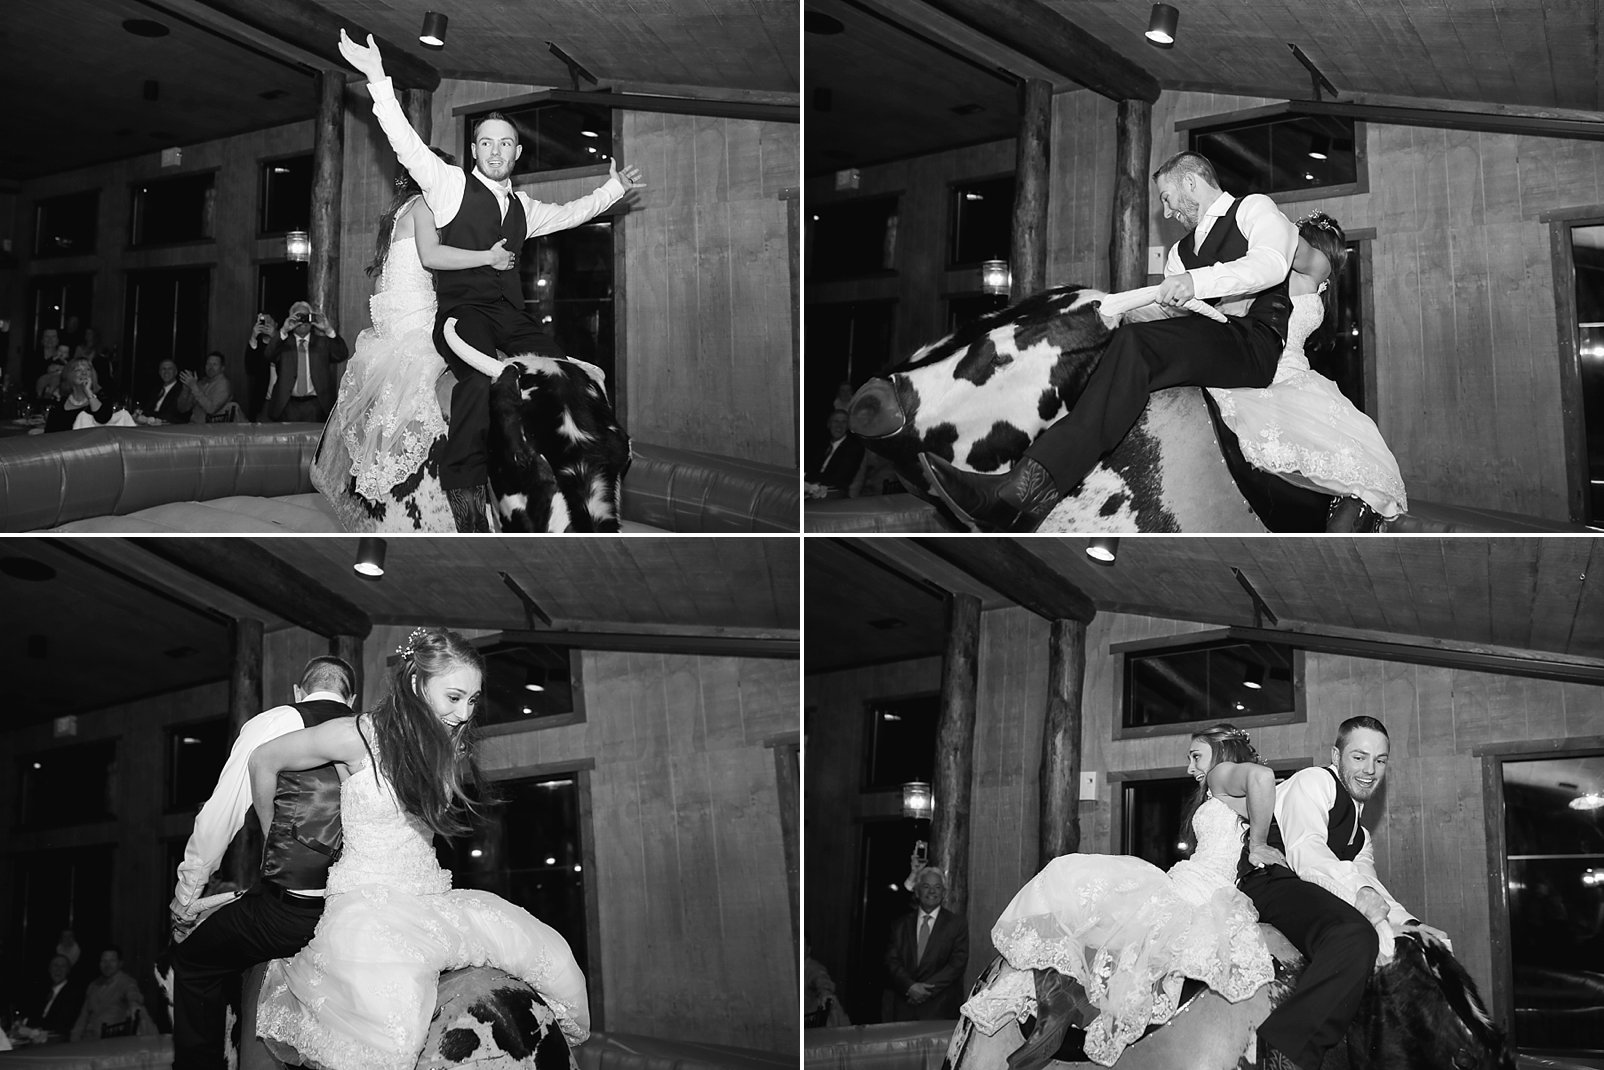 bull riding by bride and groom